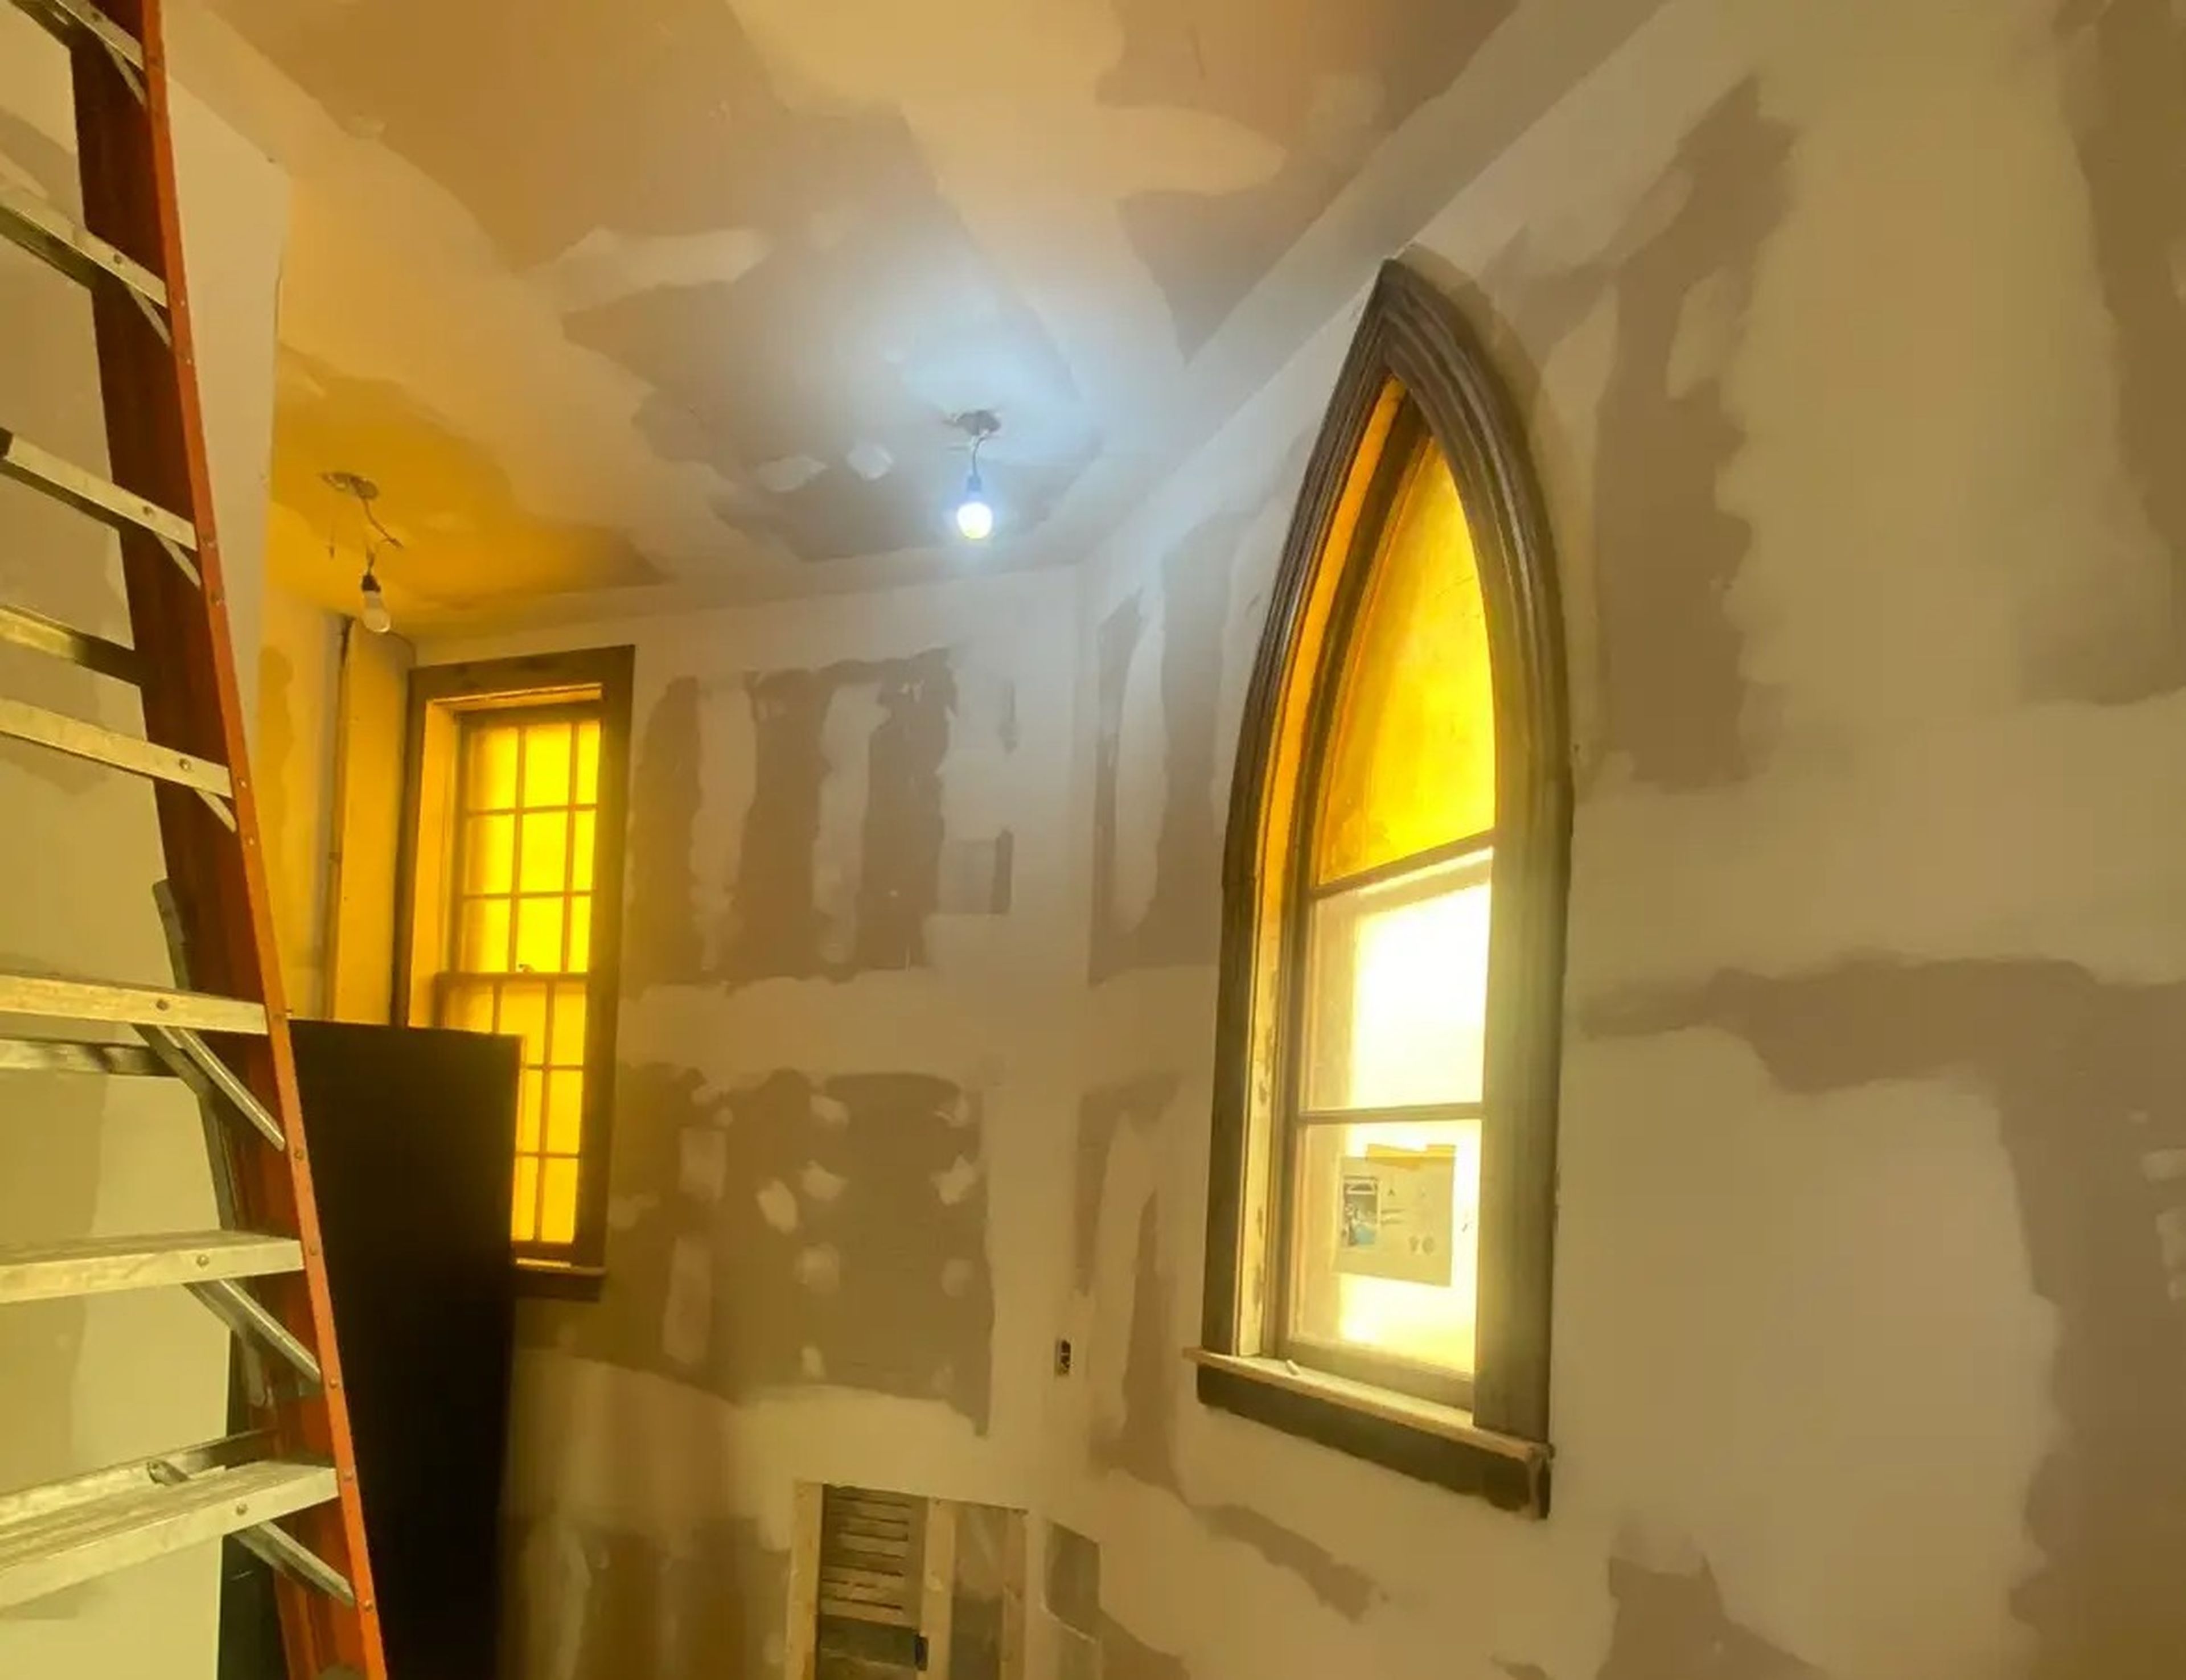 New drywall around a peaked window.